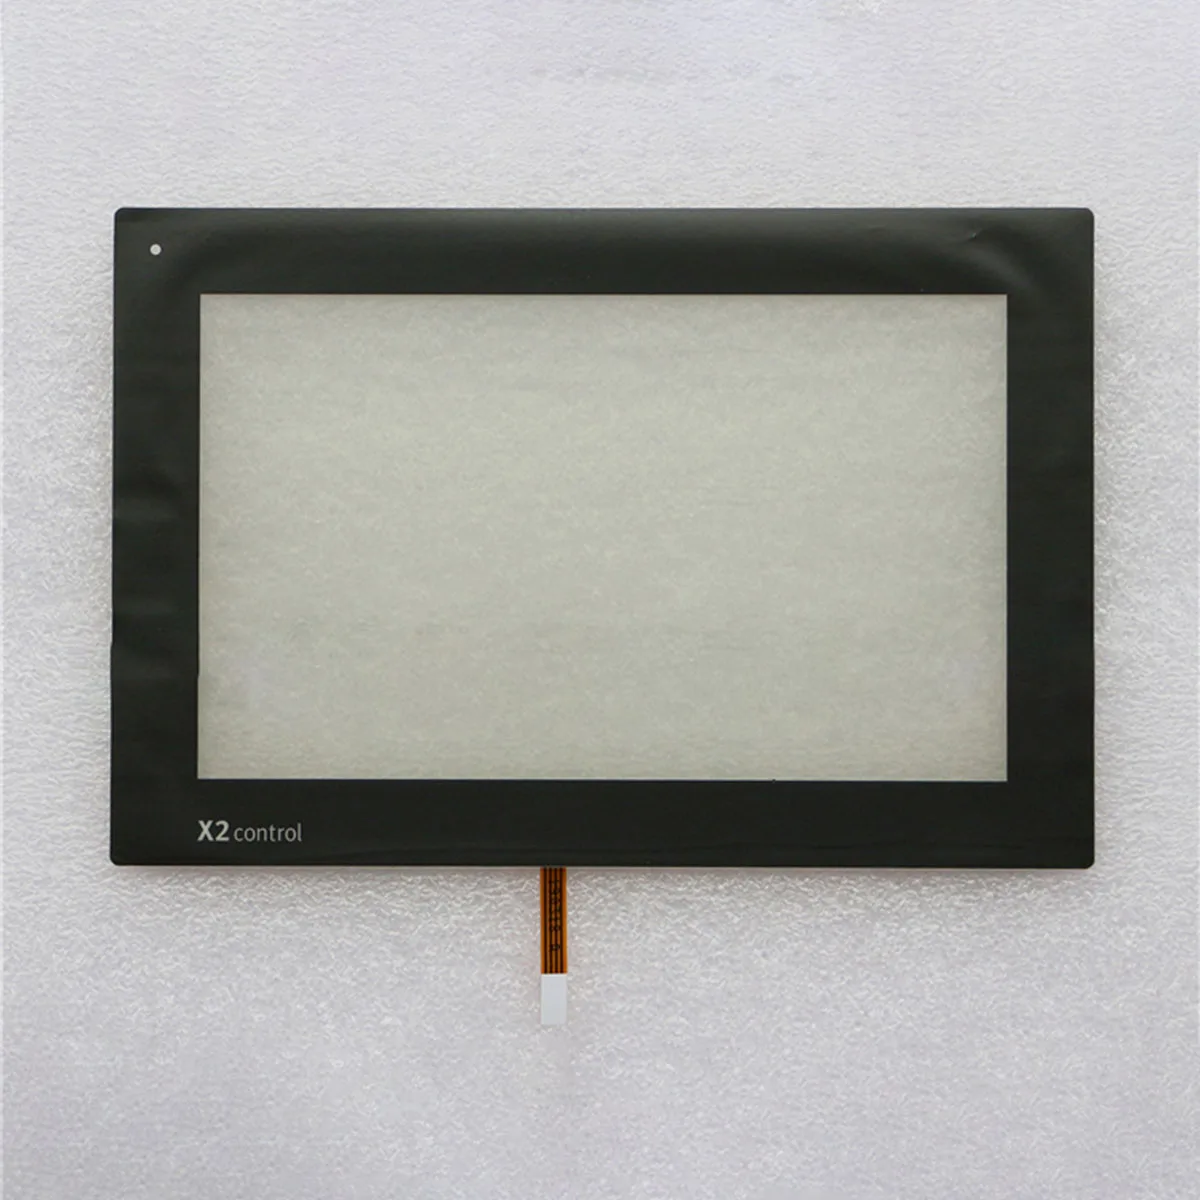 

For Beijer X2control IX T7A/AL HT Touch Screen with Protective Film Panel